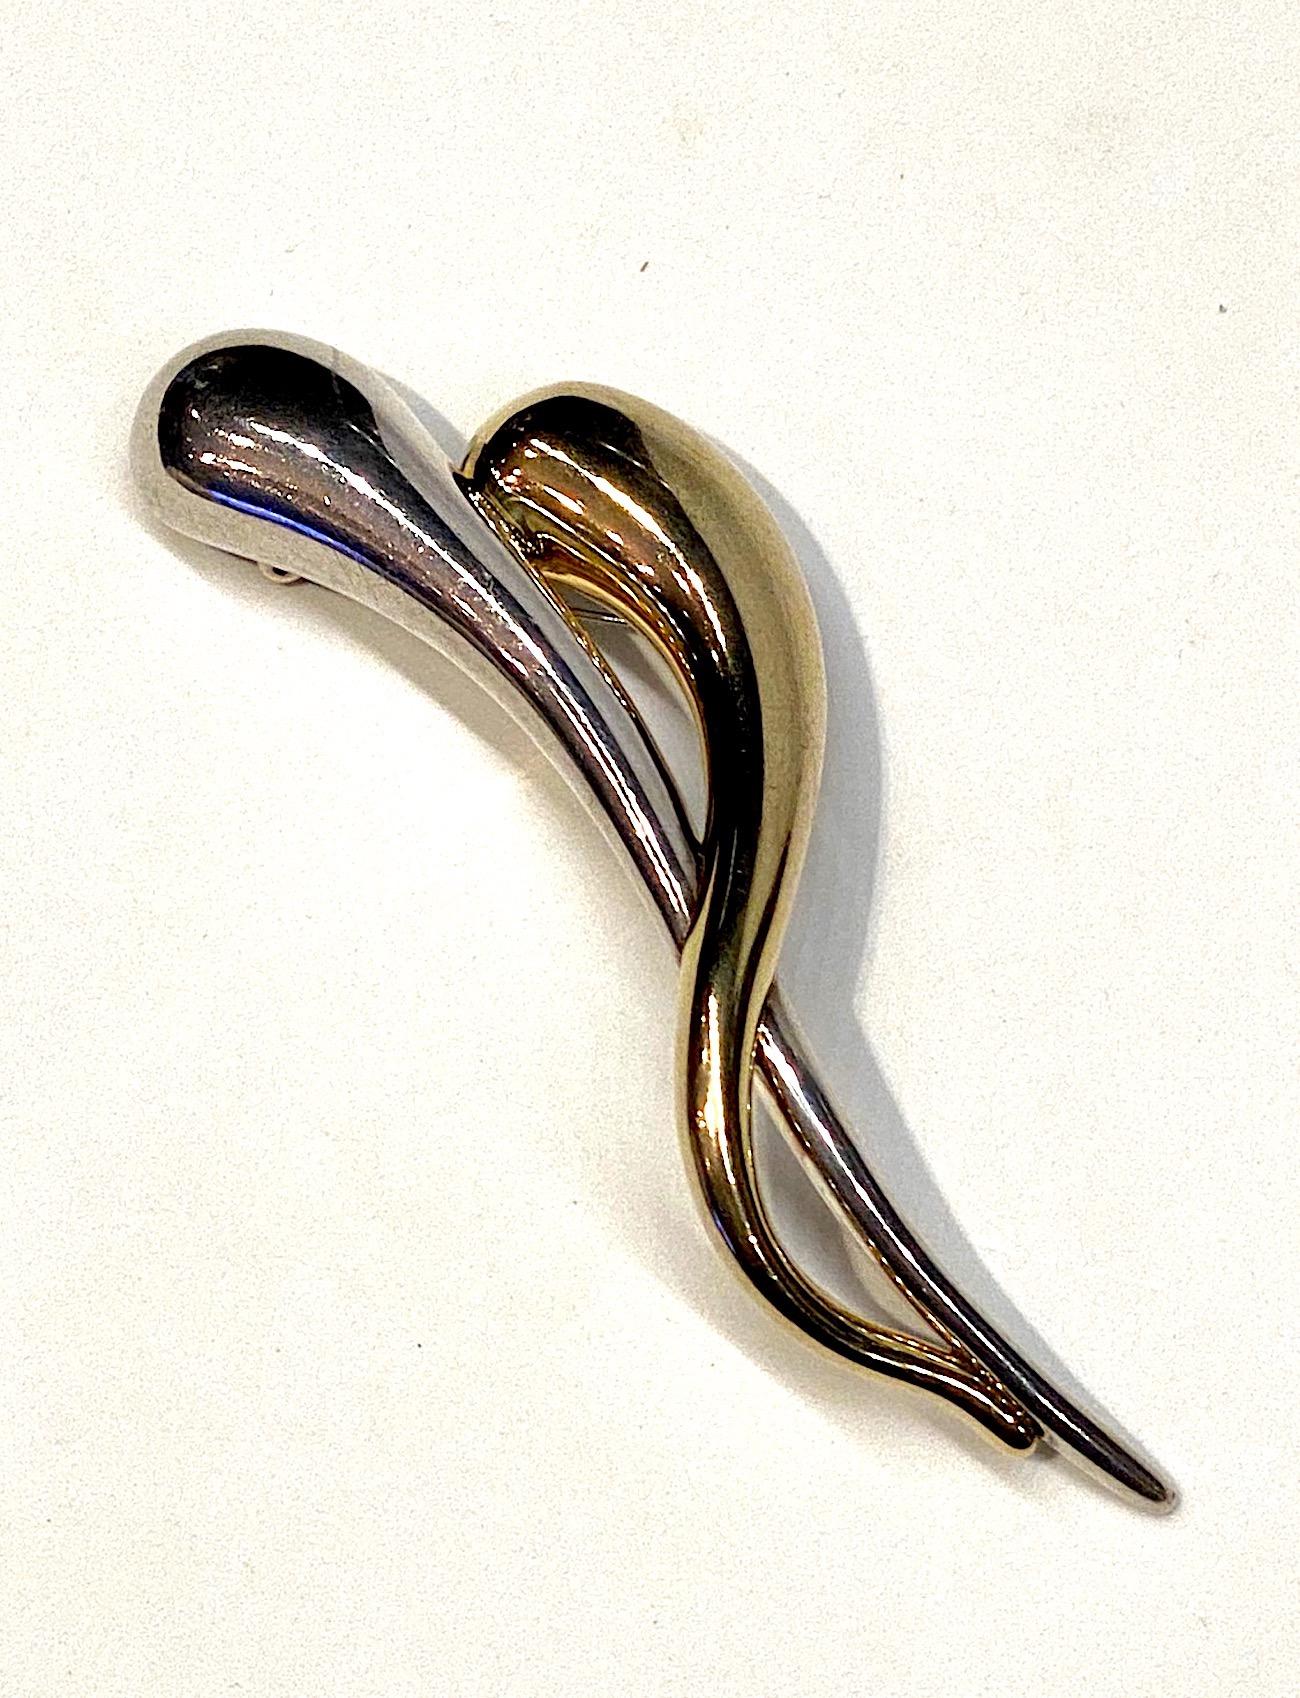 A last artist made brooch in sterling silver with gold plate.  One of the two elongated exclamation shapes is in the natural sterling silver color white the second one is gold plated. The brooch measures 1.63 inches wide, 4.88 inches long and 1 inch